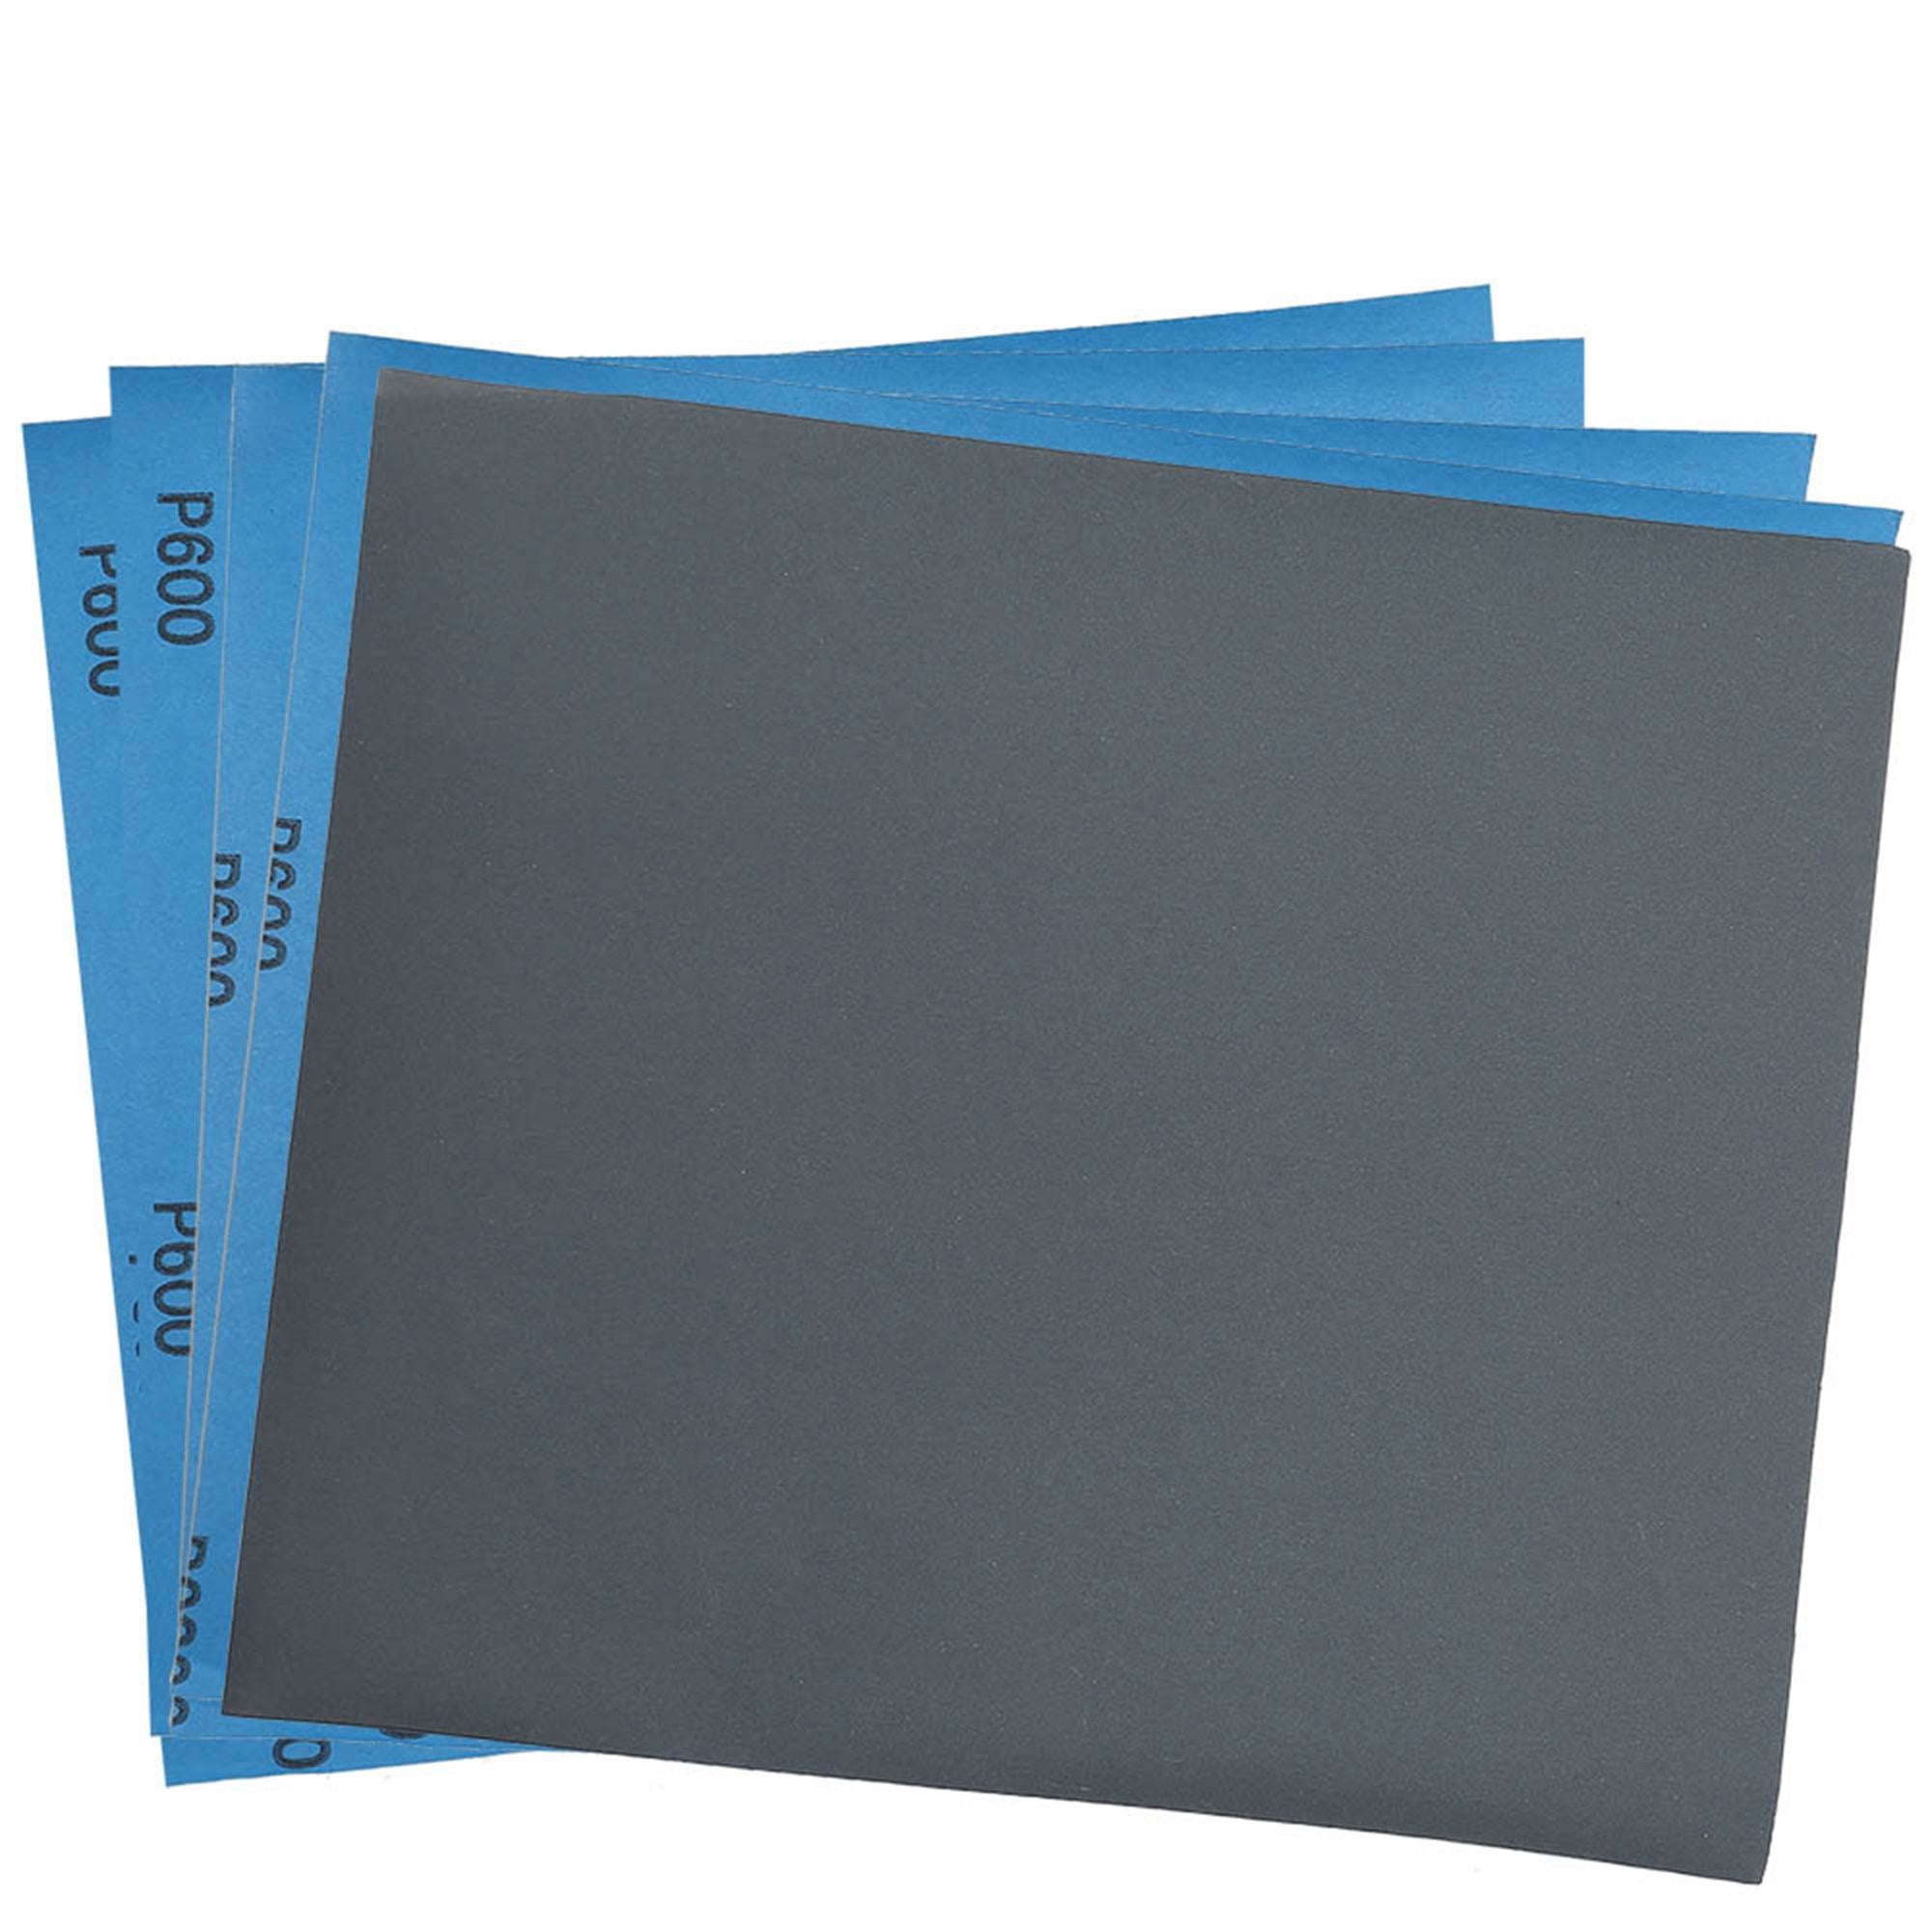 120 Sheets Wet Dry Assorted Grits Sandpaper Sanding Paper 9 x 11" inch Wood Pain